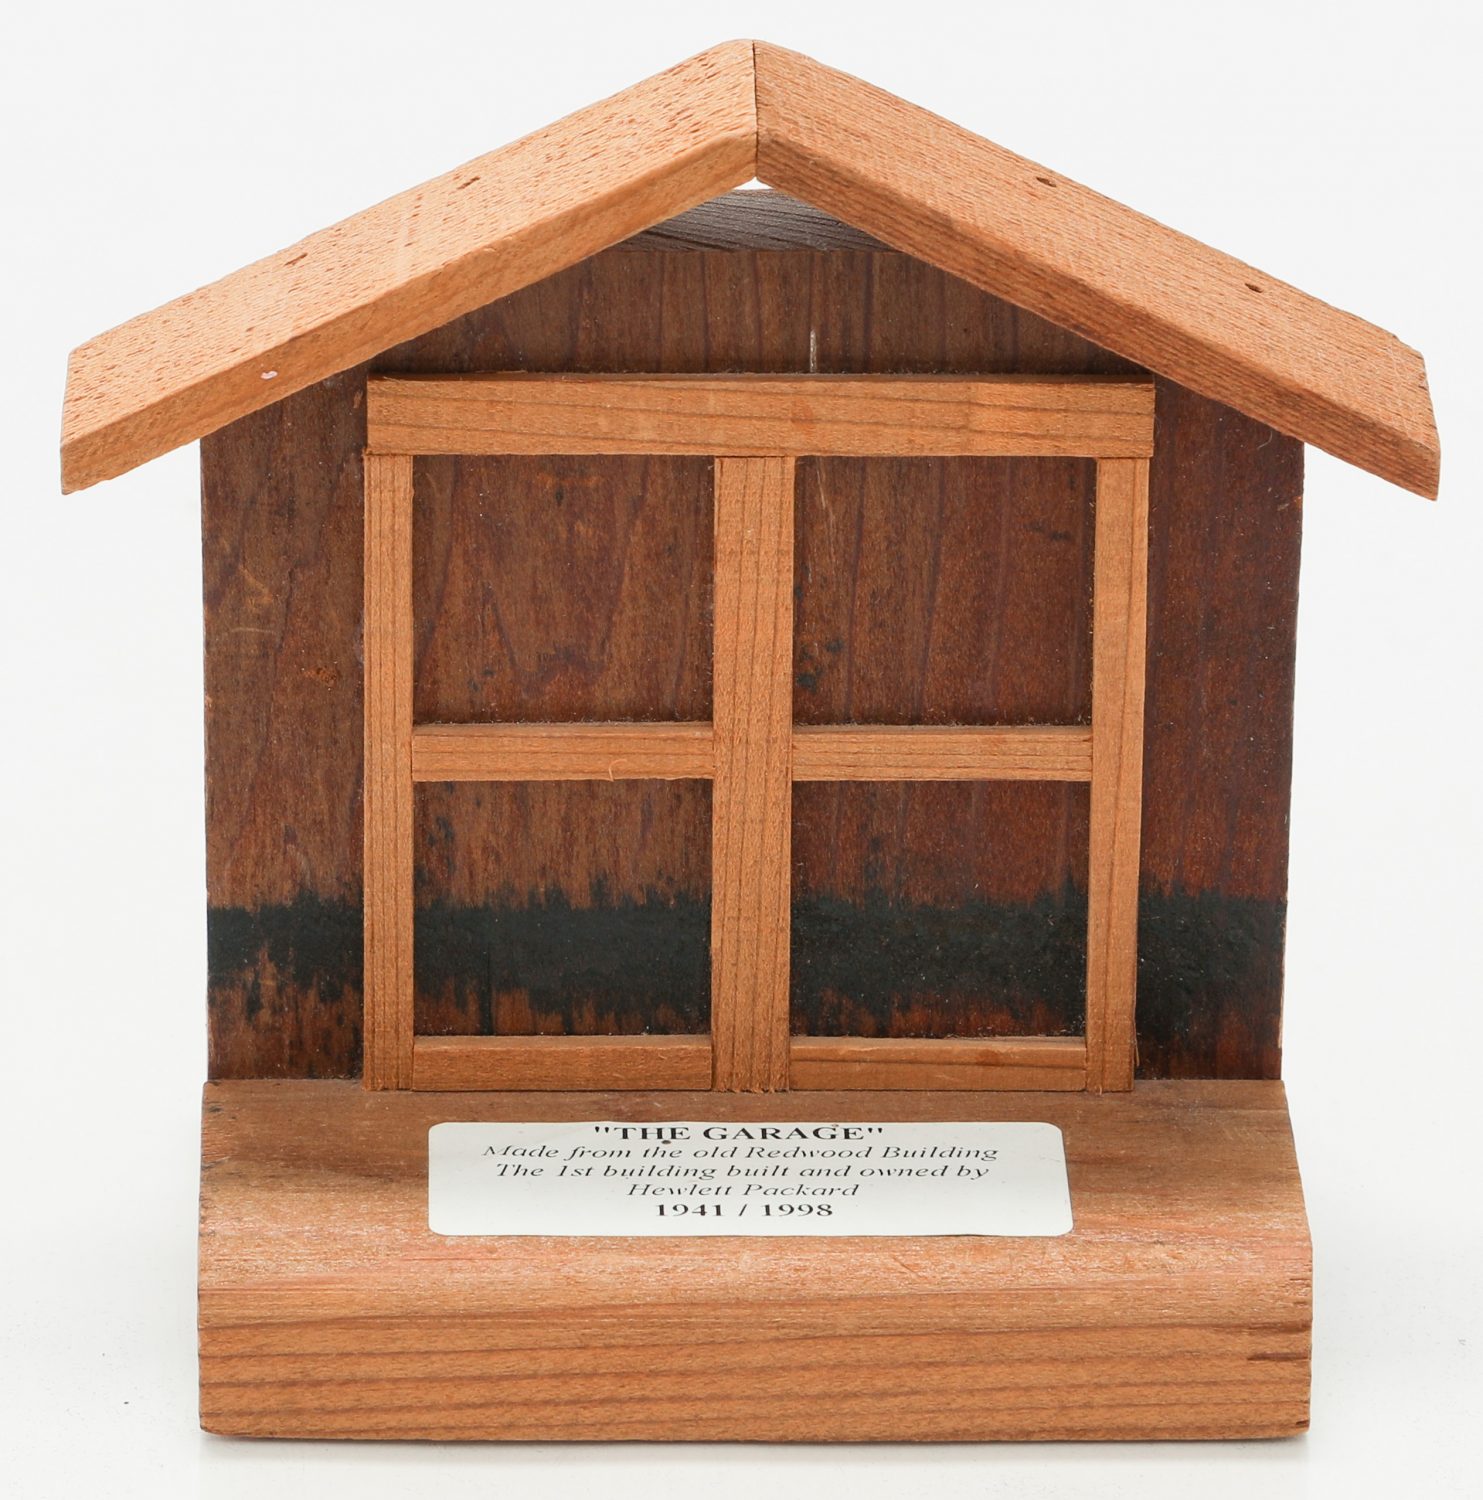 A miniature representation of the Addison Avenue garage made from wood reclaimed from HP's Redwood Building.